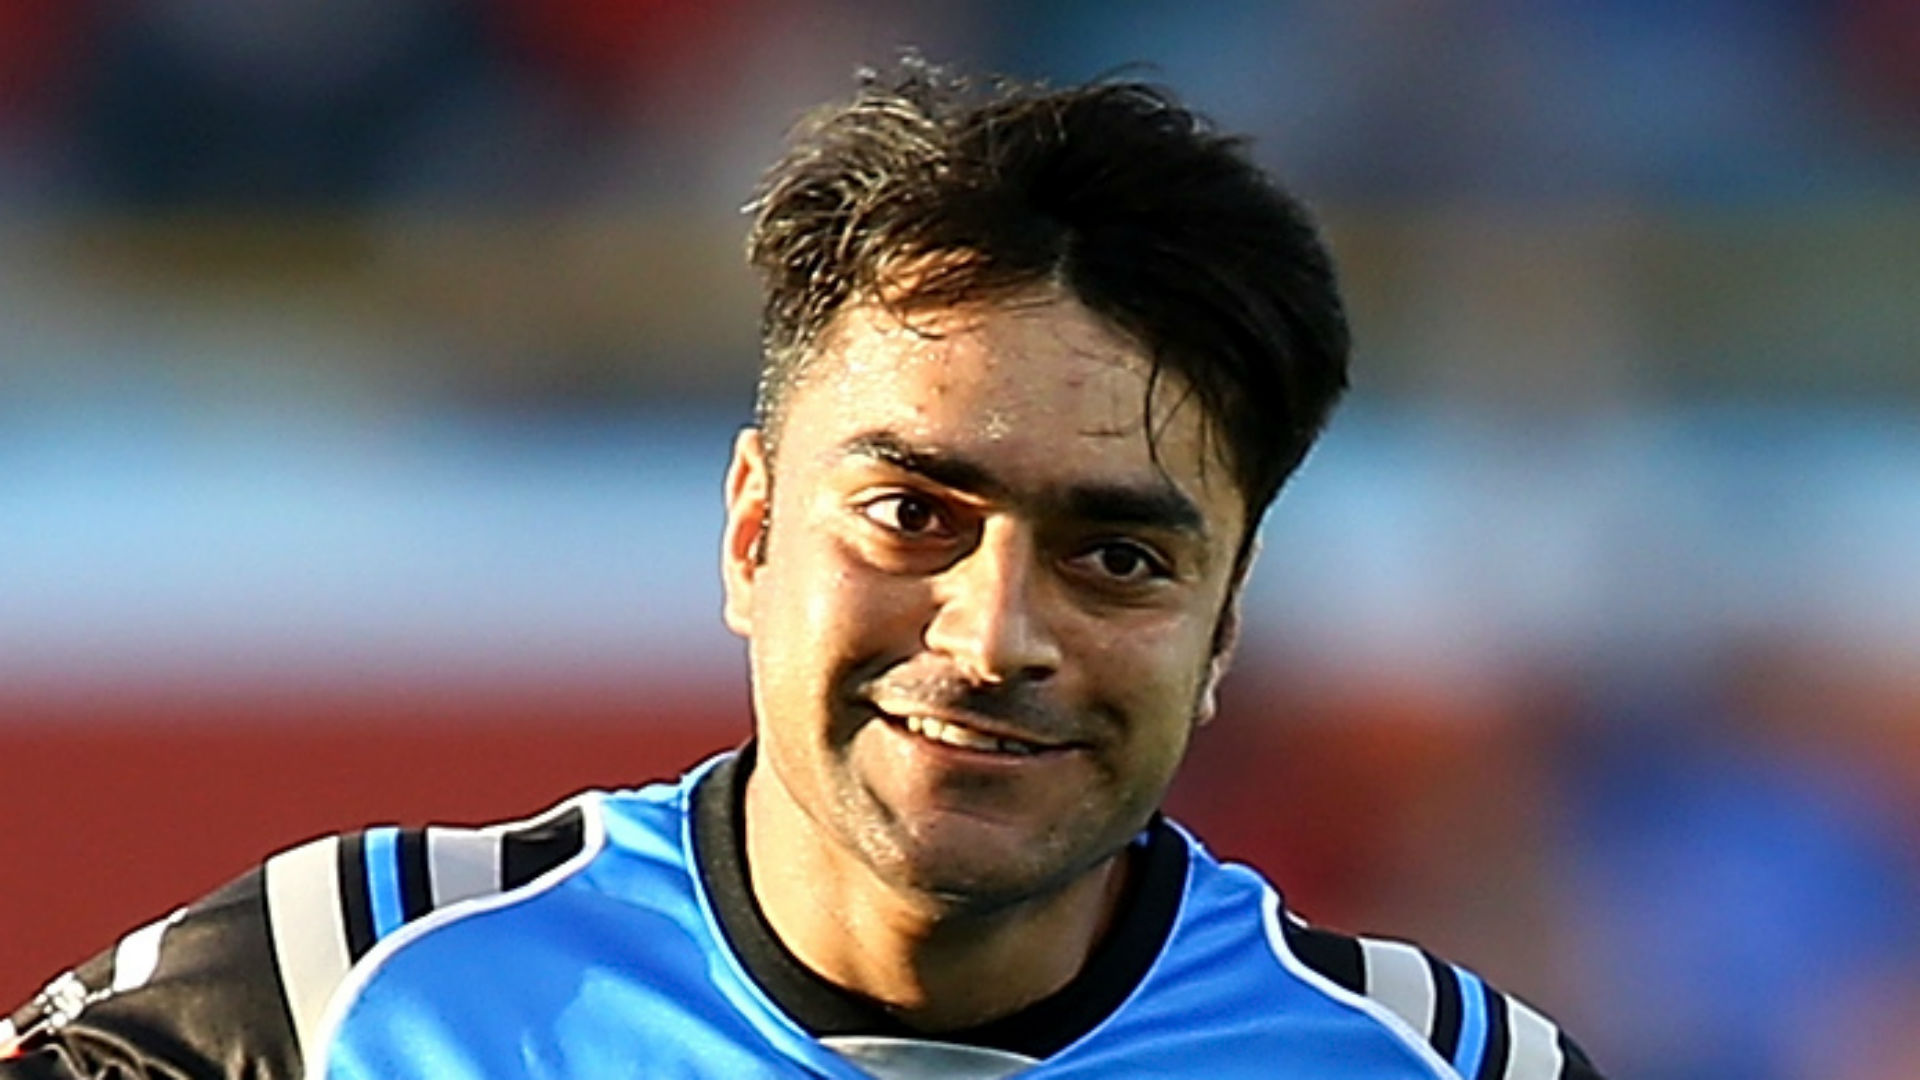 Afghanistan clinched a bilateral T20I series win over a side other than Zimbabwe for the first time, with Rashid Khan starring.